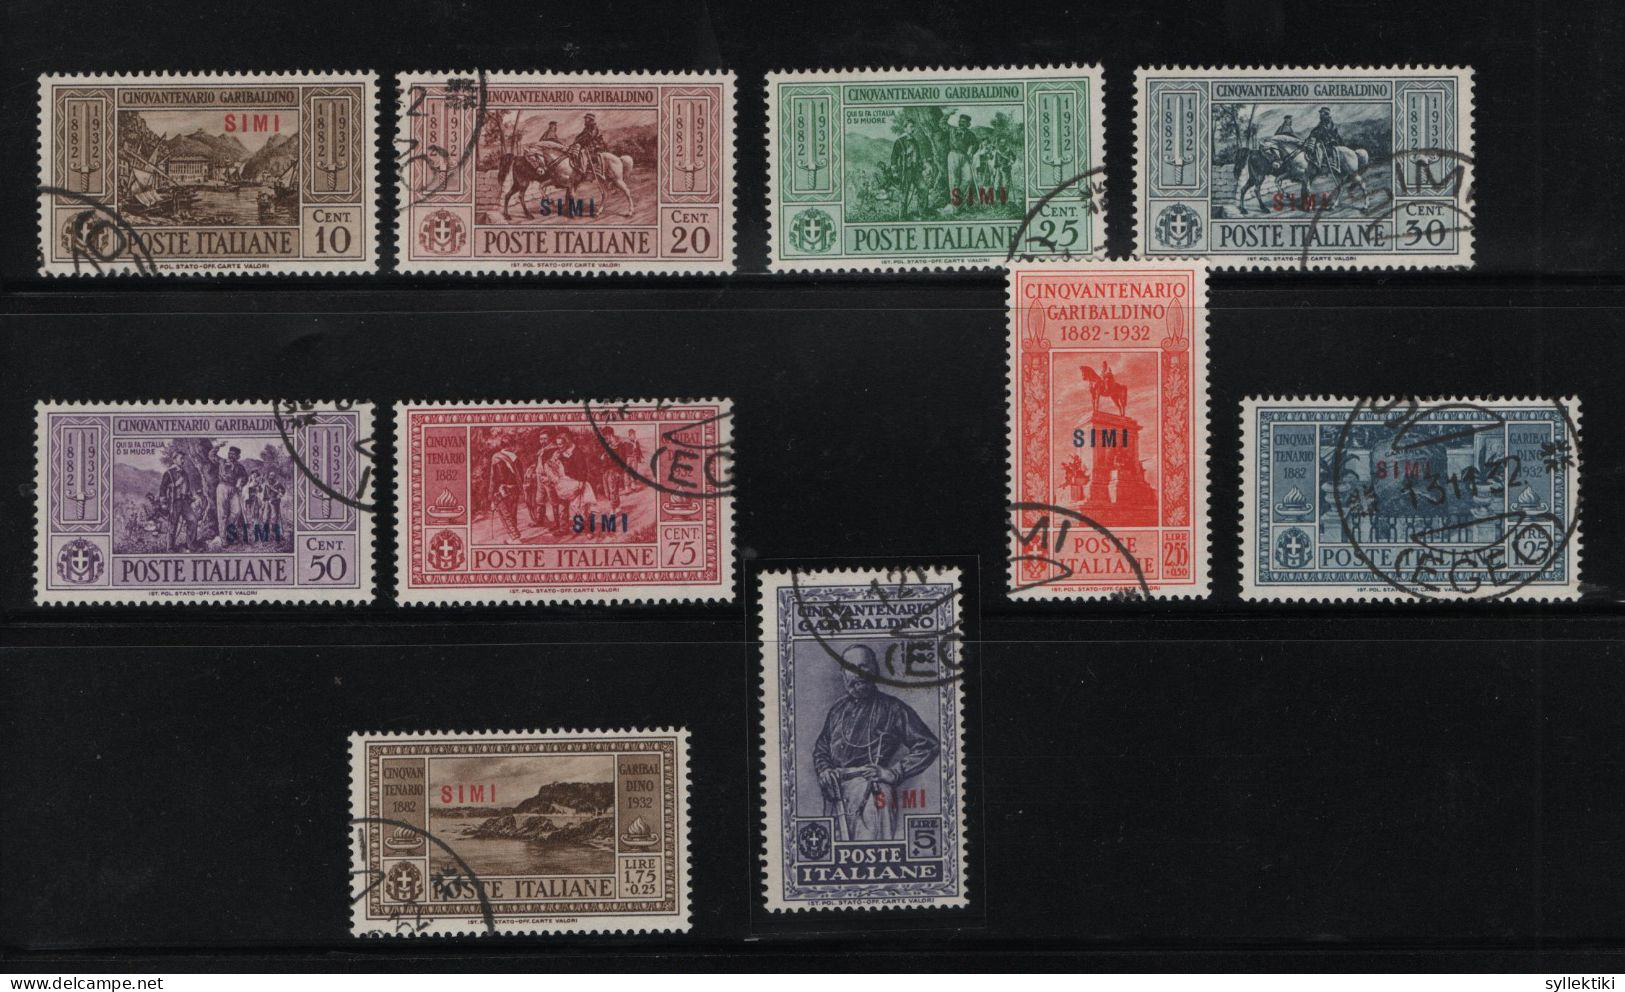 GREECE 1932 DODECANESE GARIBALDI ISSUE SIMI OVERPRINT COMPLETE SET USED STAMPS   HELLAS No 108XIII - 117XIII AND VALUE - Dodekanisos